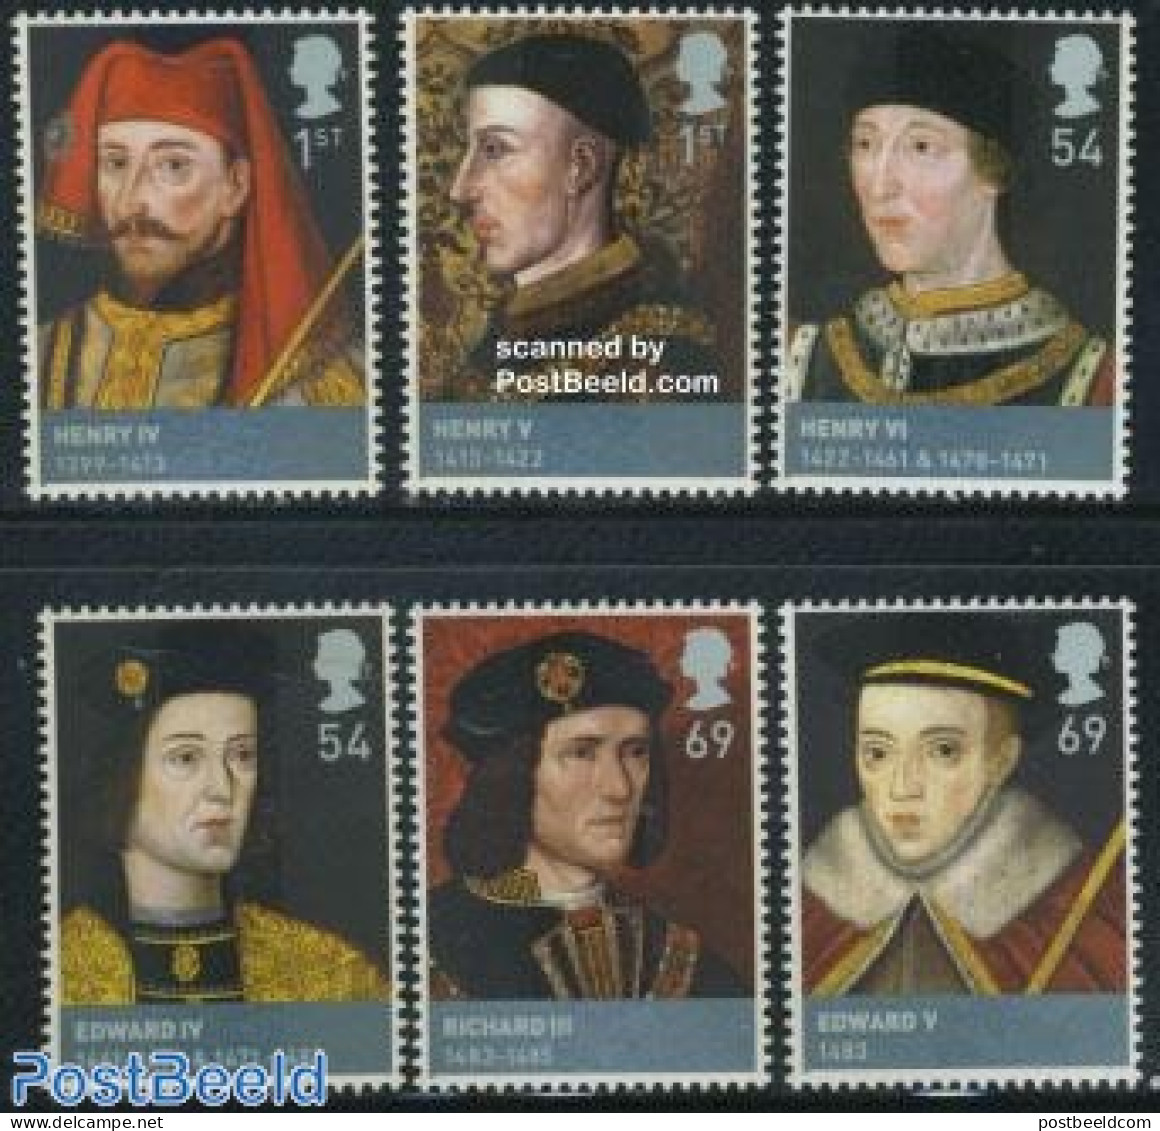 Great Britain 2008 Lancaster & York 6v, Mint NH, History - Kings & Queens (Royalty) - Neufs